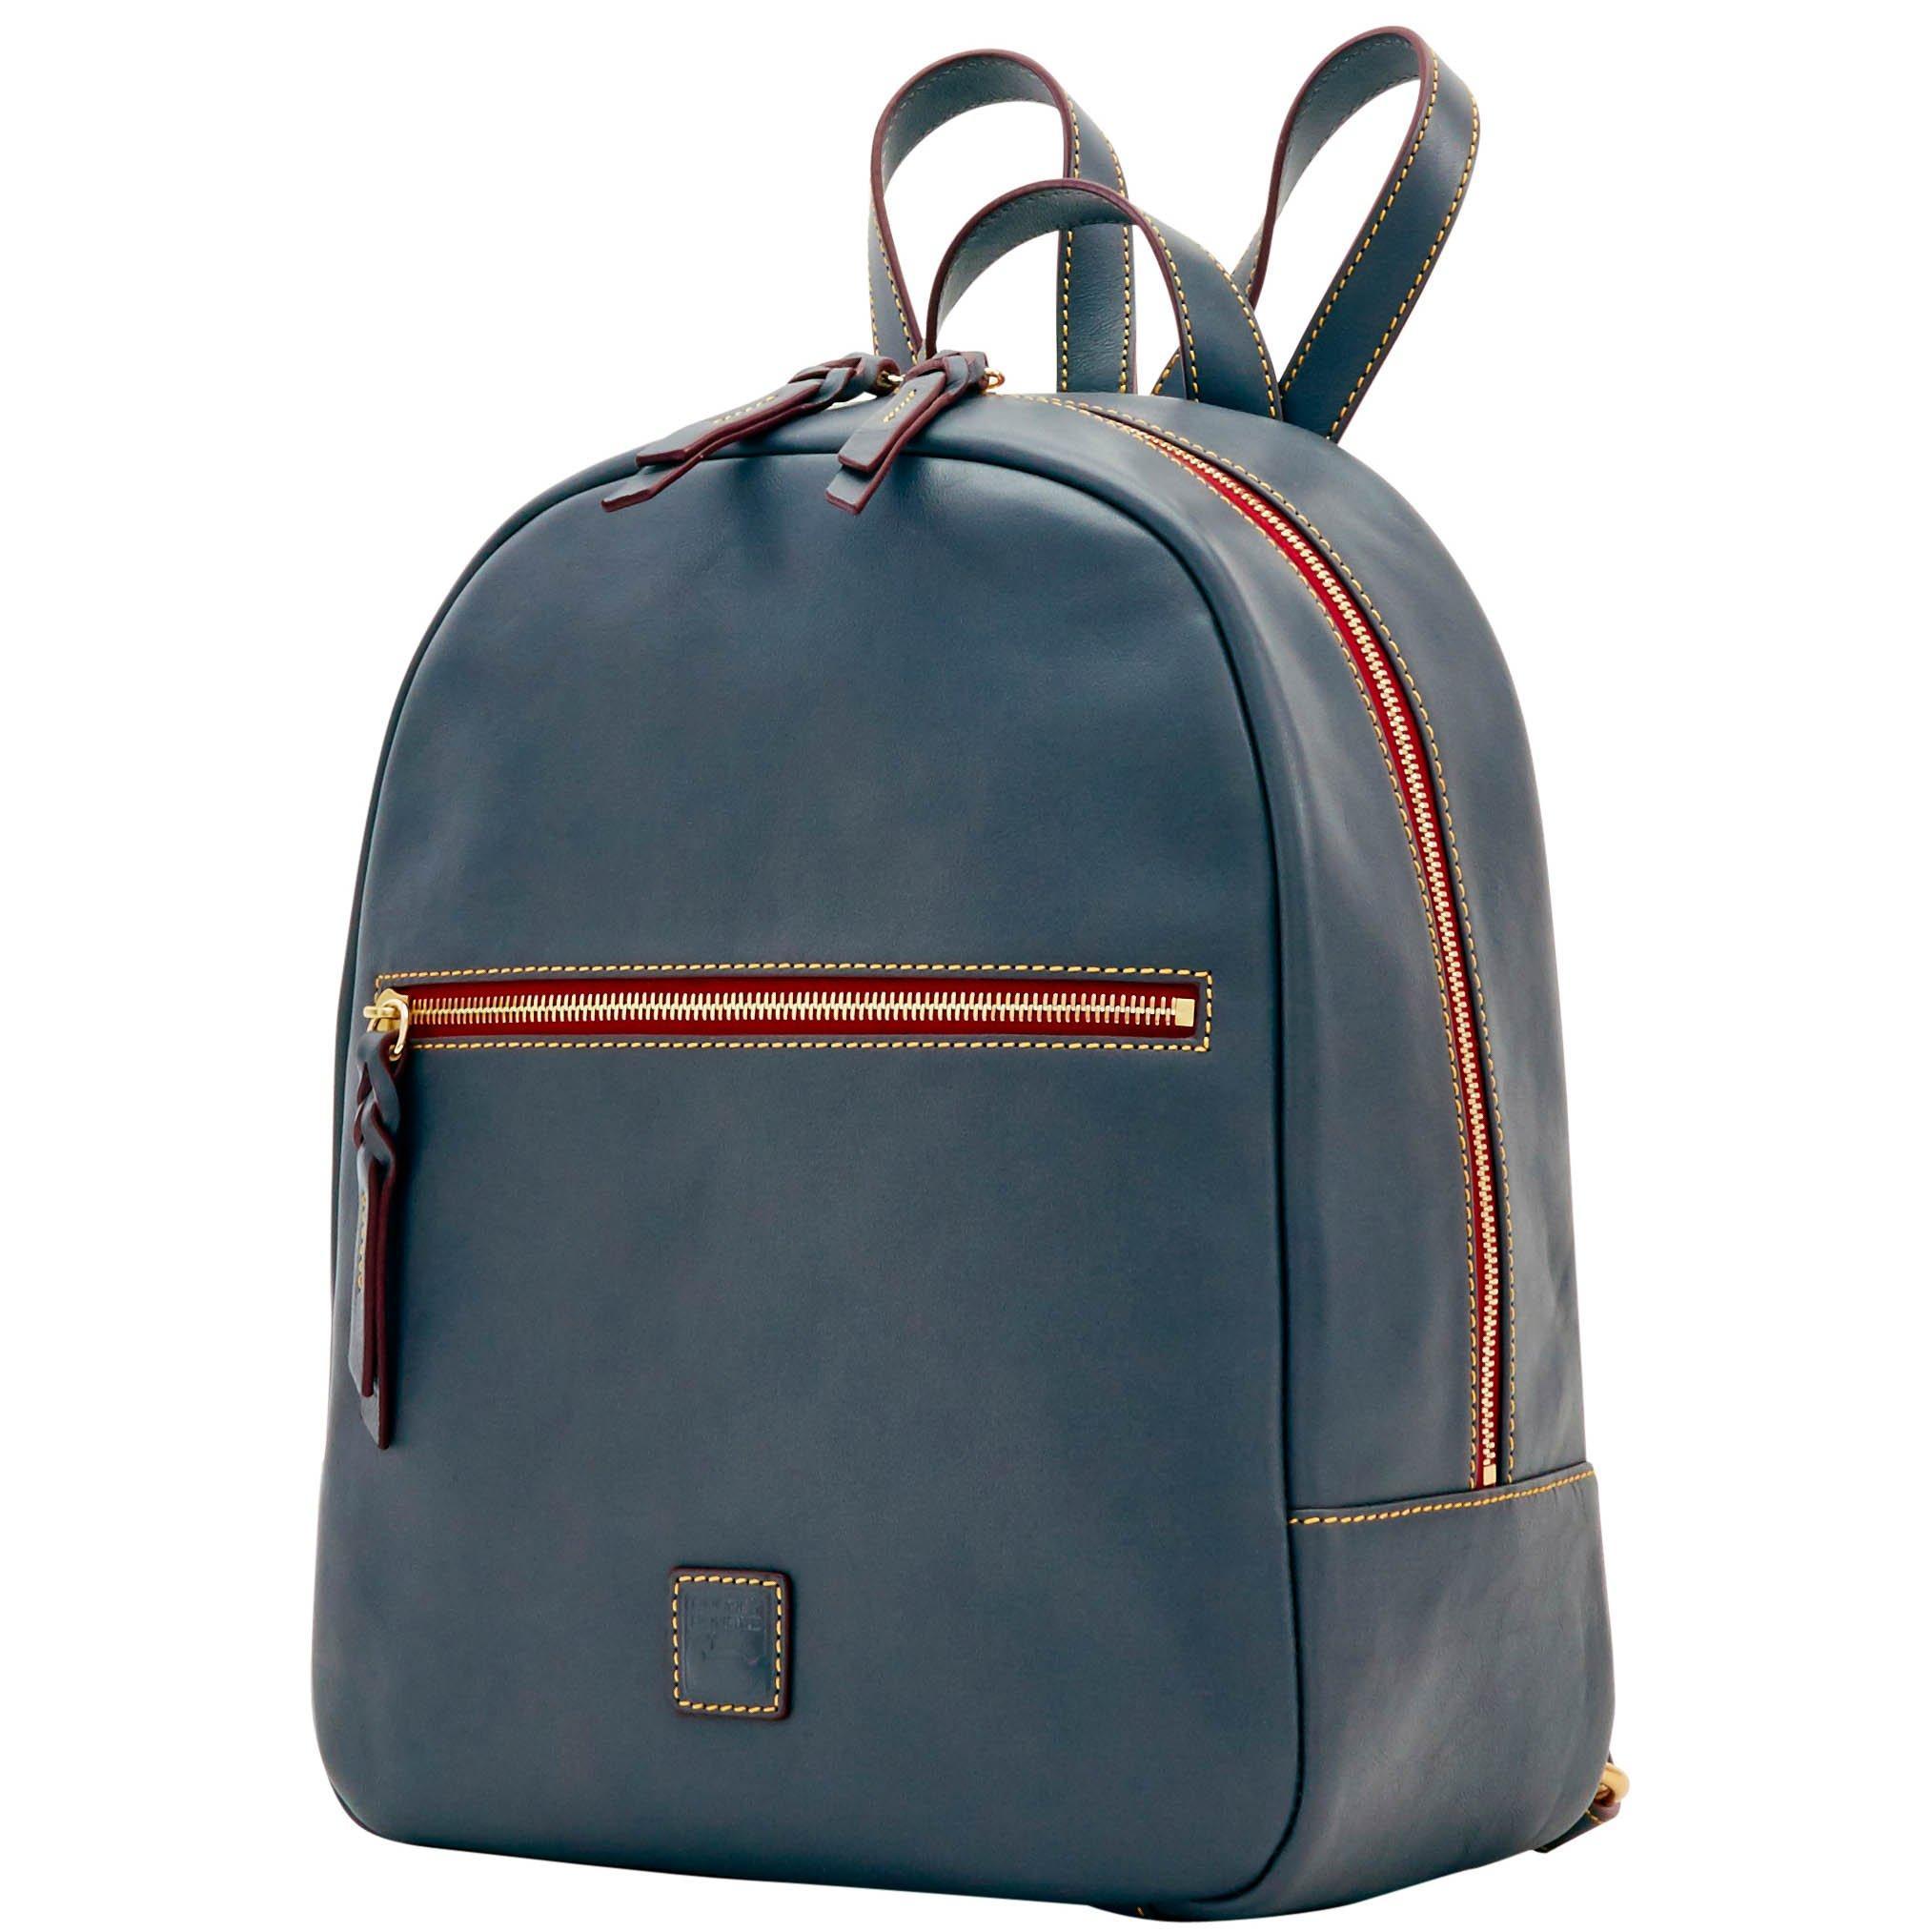 Dooney & Bourke Leather Florentine Ronnie Backpack - Lyst